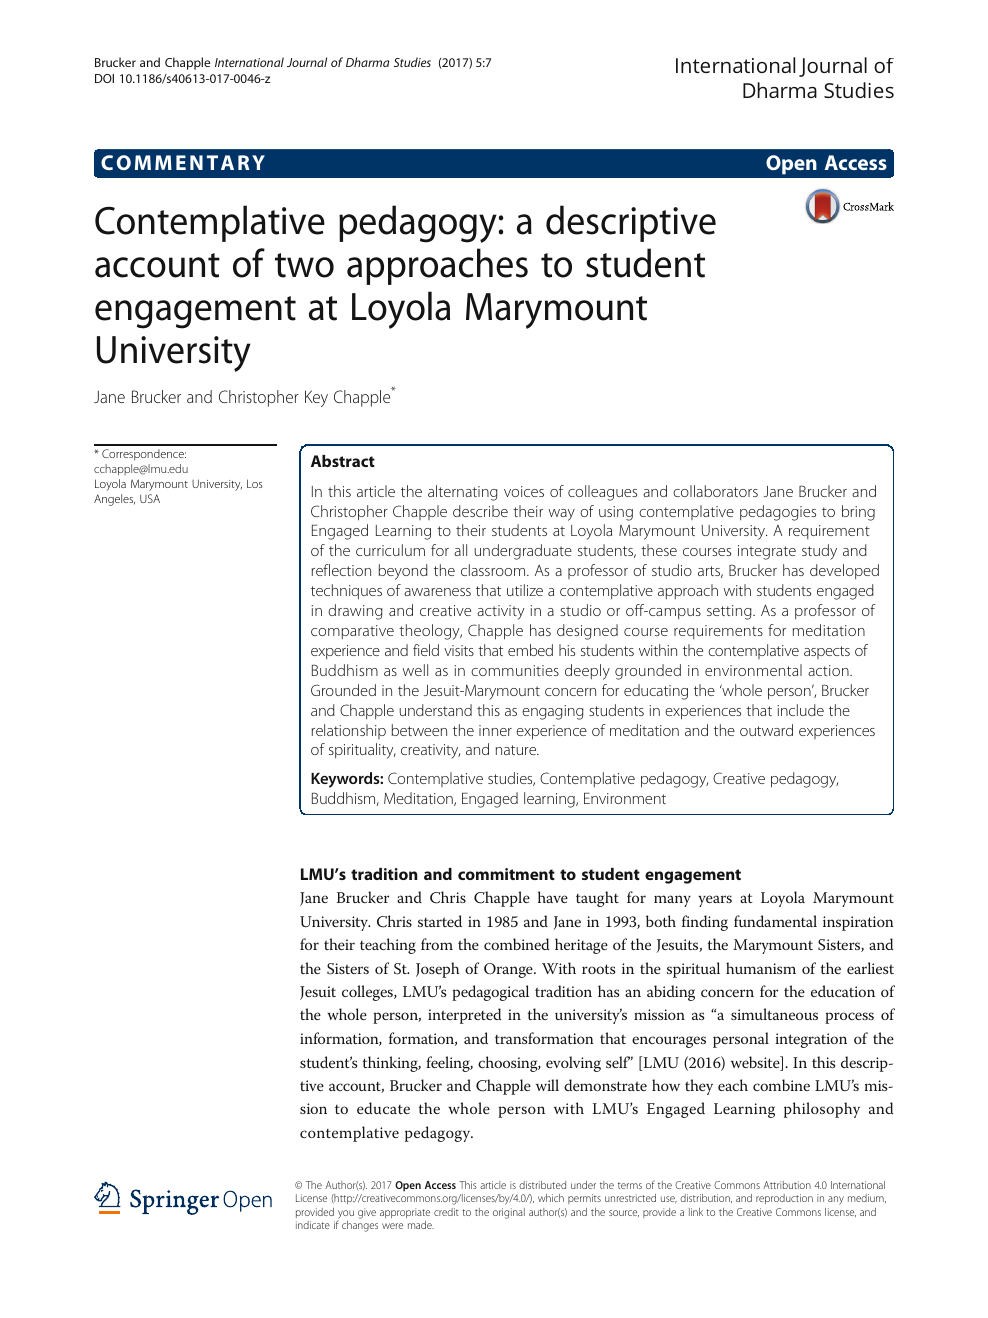 Contemplative pedagogy: a descriptive account of two approaches to student  engagement at Loyola Marymount University – topic of research paper in  Educational sciences. Download scholarly article PDF and read for free on